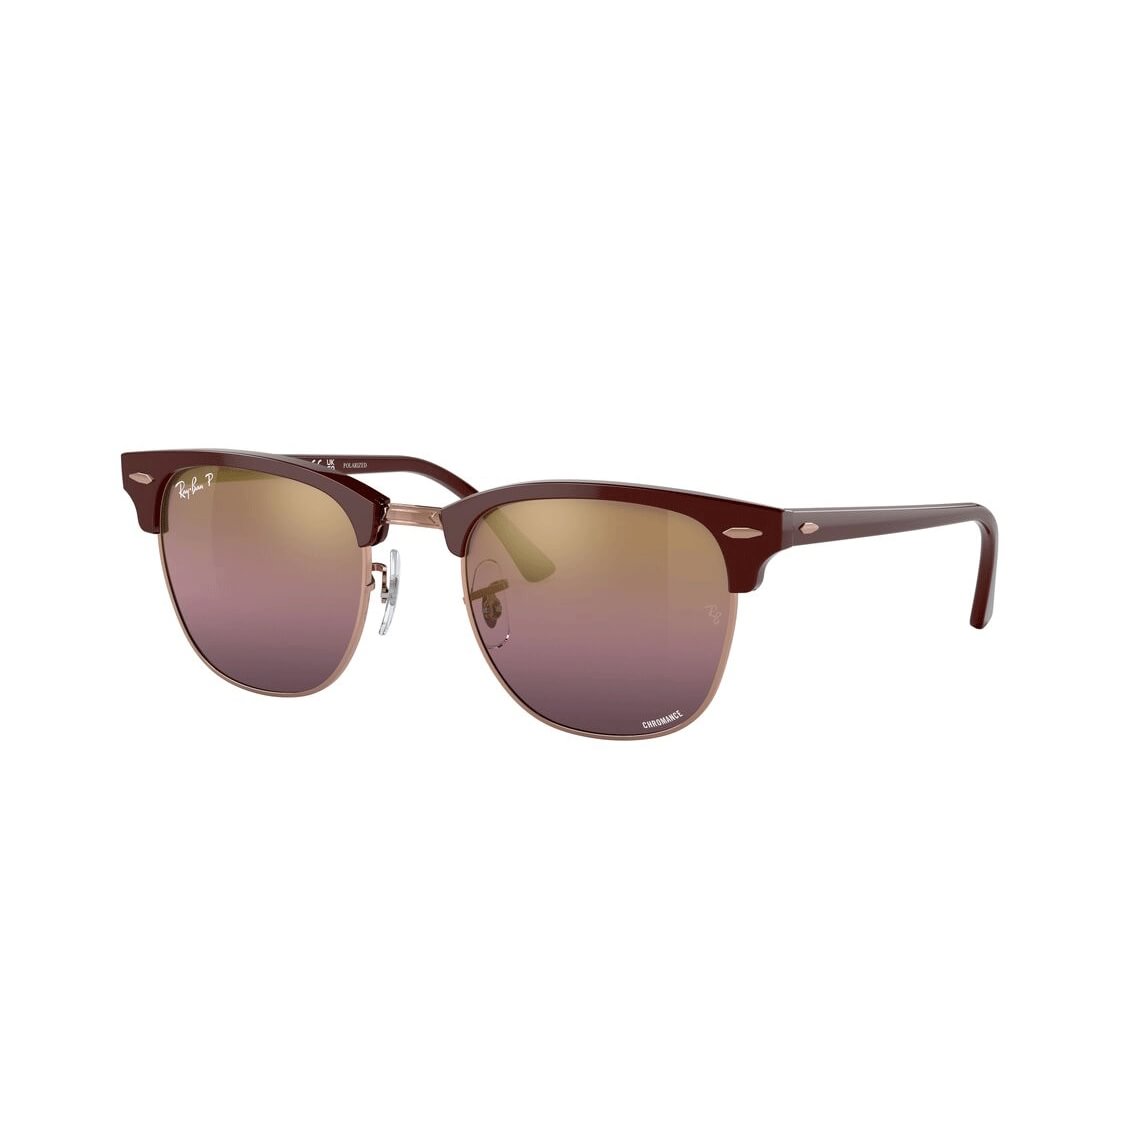 Ray-Ban Clubmaster RB3016 1365G9 5121